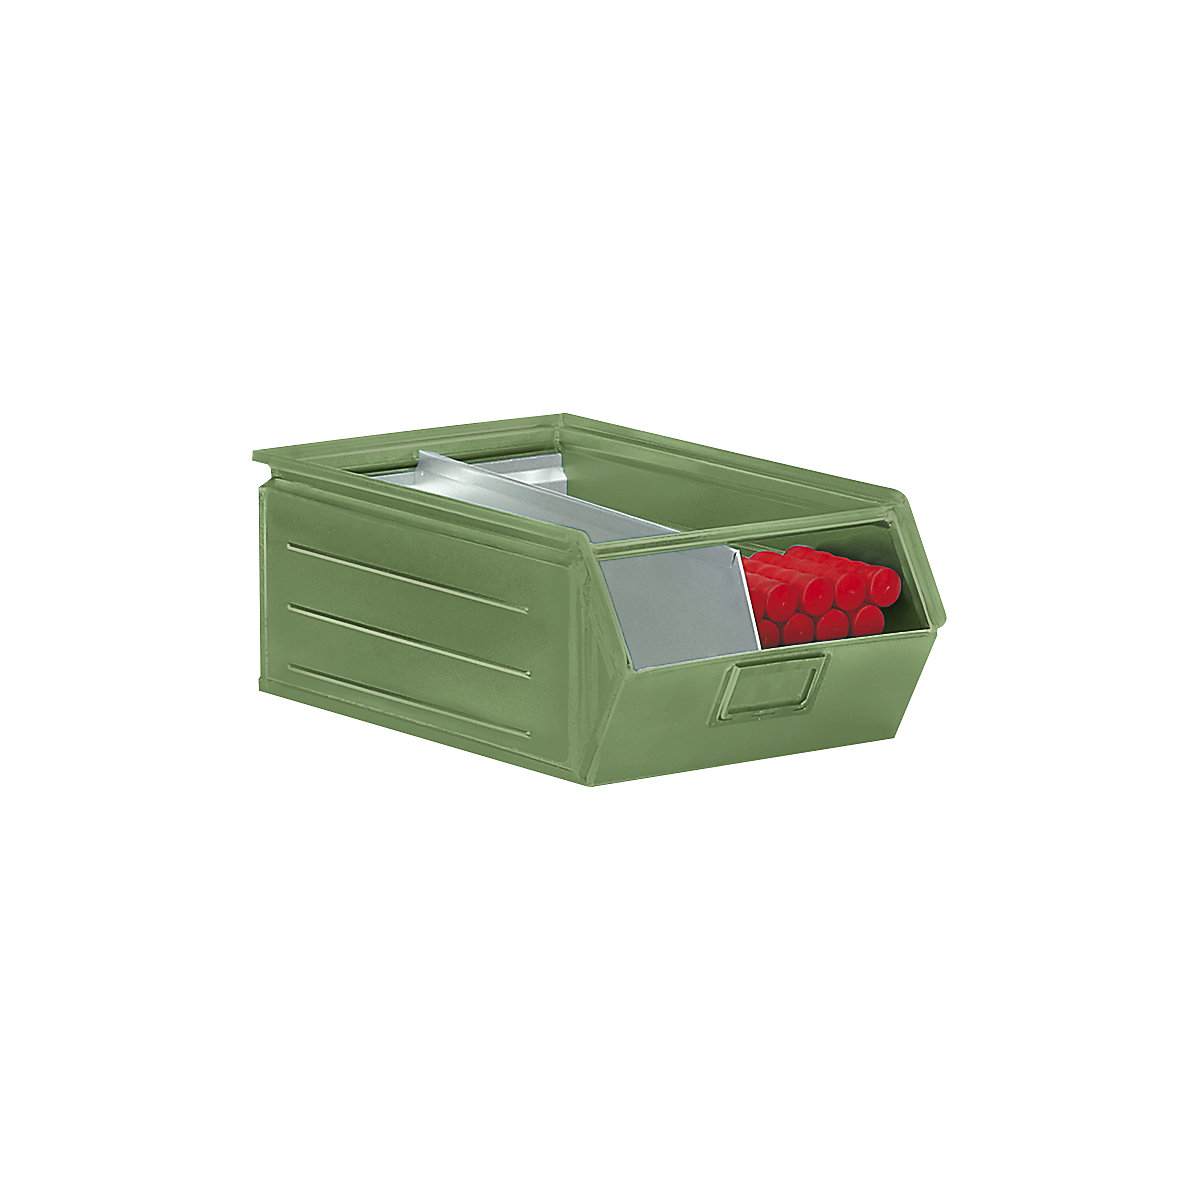 Open fronted storage bin made of sheet steel, LxWxH 515 x 310 x 200 mm, with support rod, reseda green-5